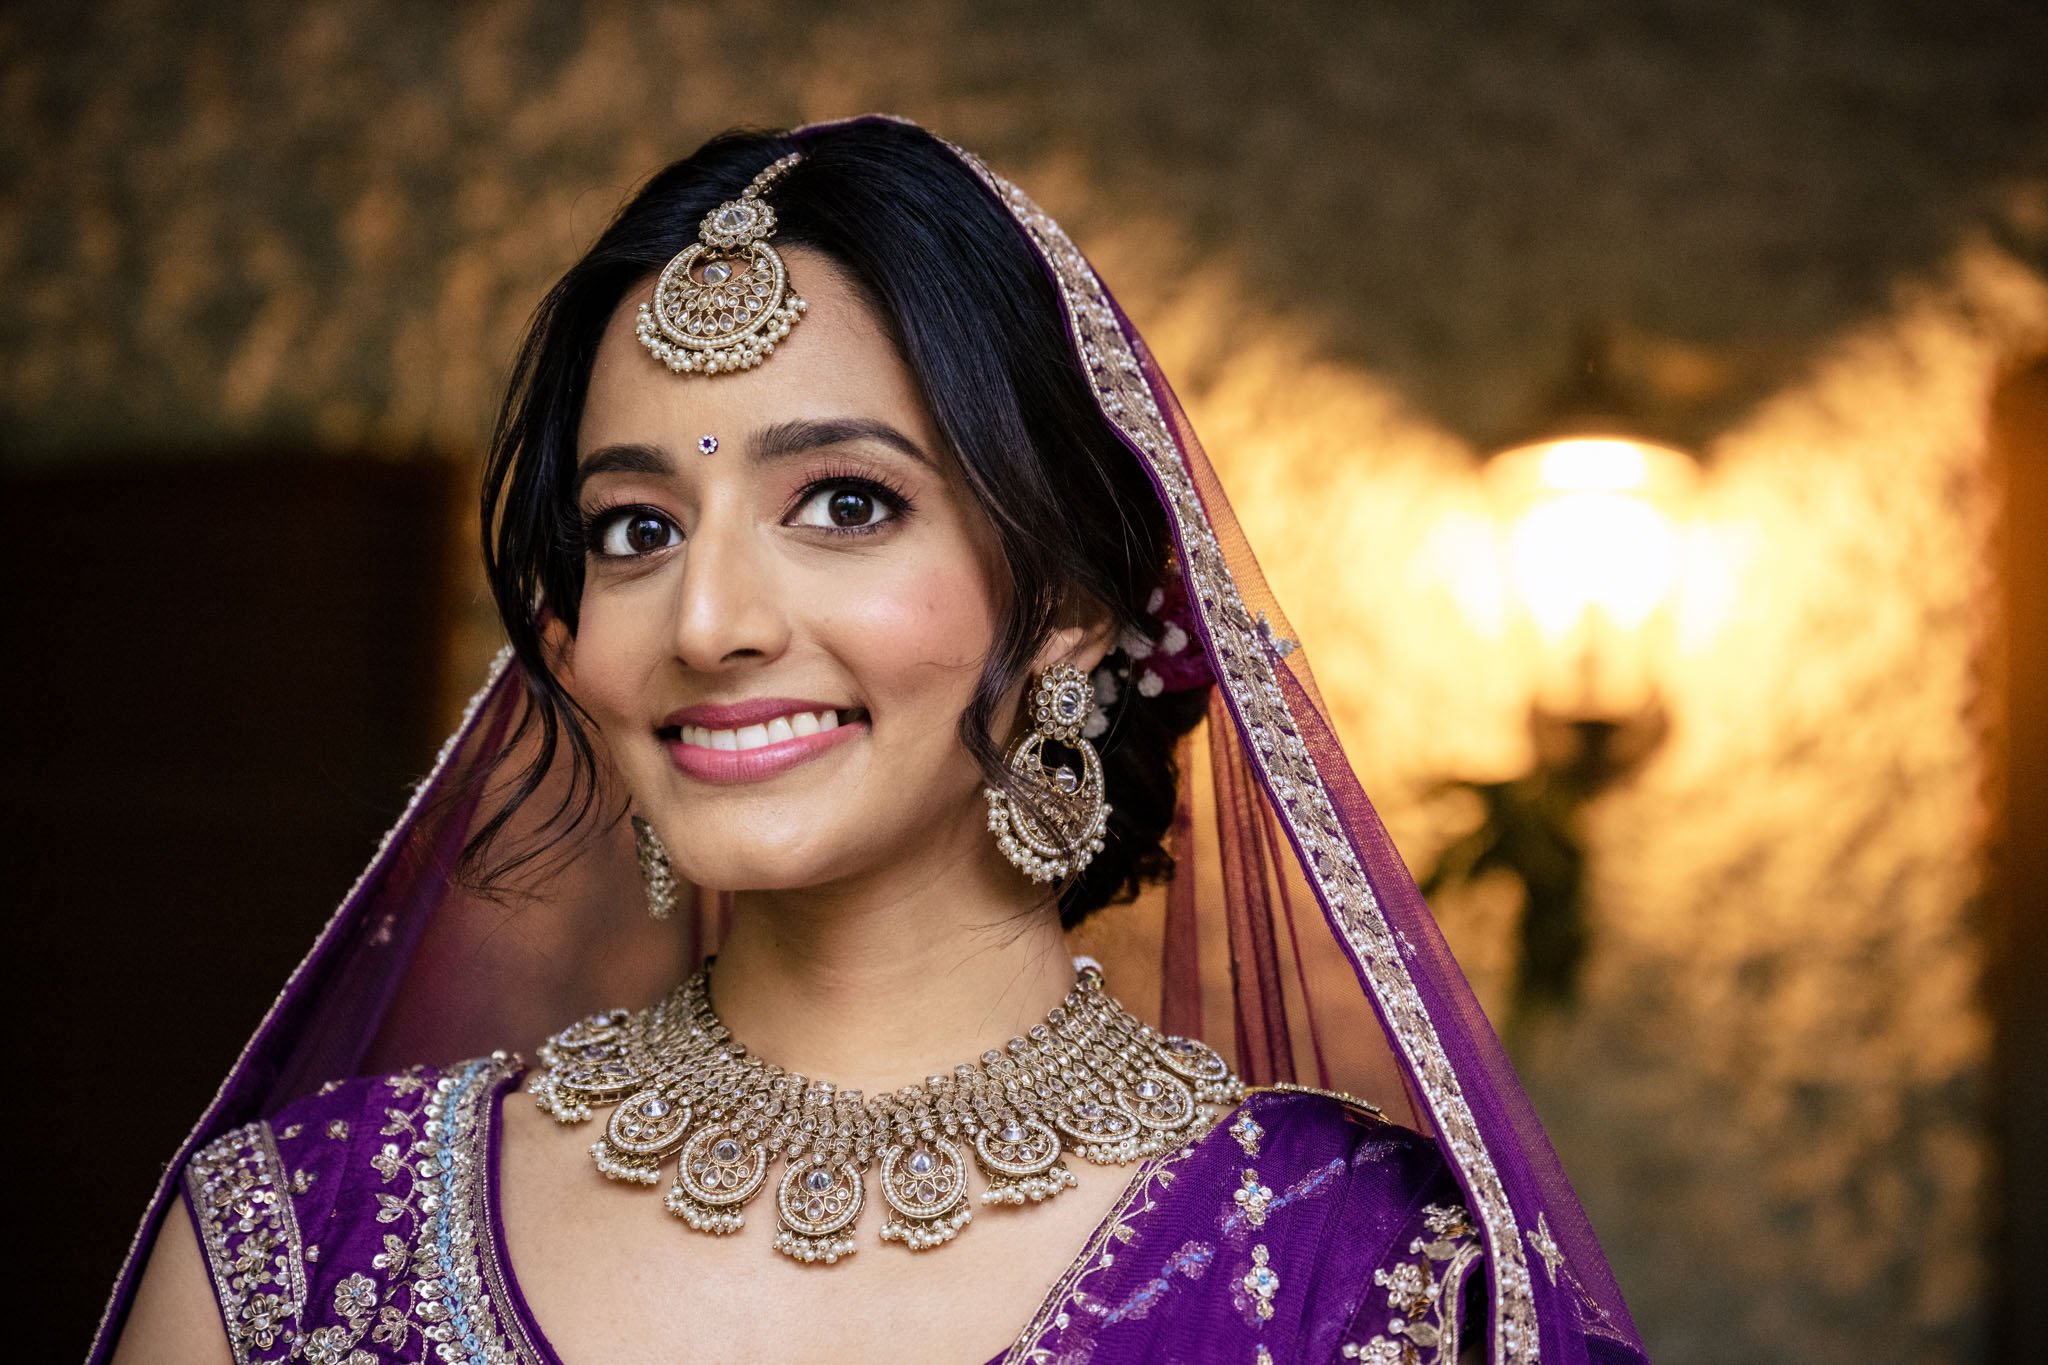 An Indian bride in a purple lehenga posing for a photo at a Biltmore Estate wedding.